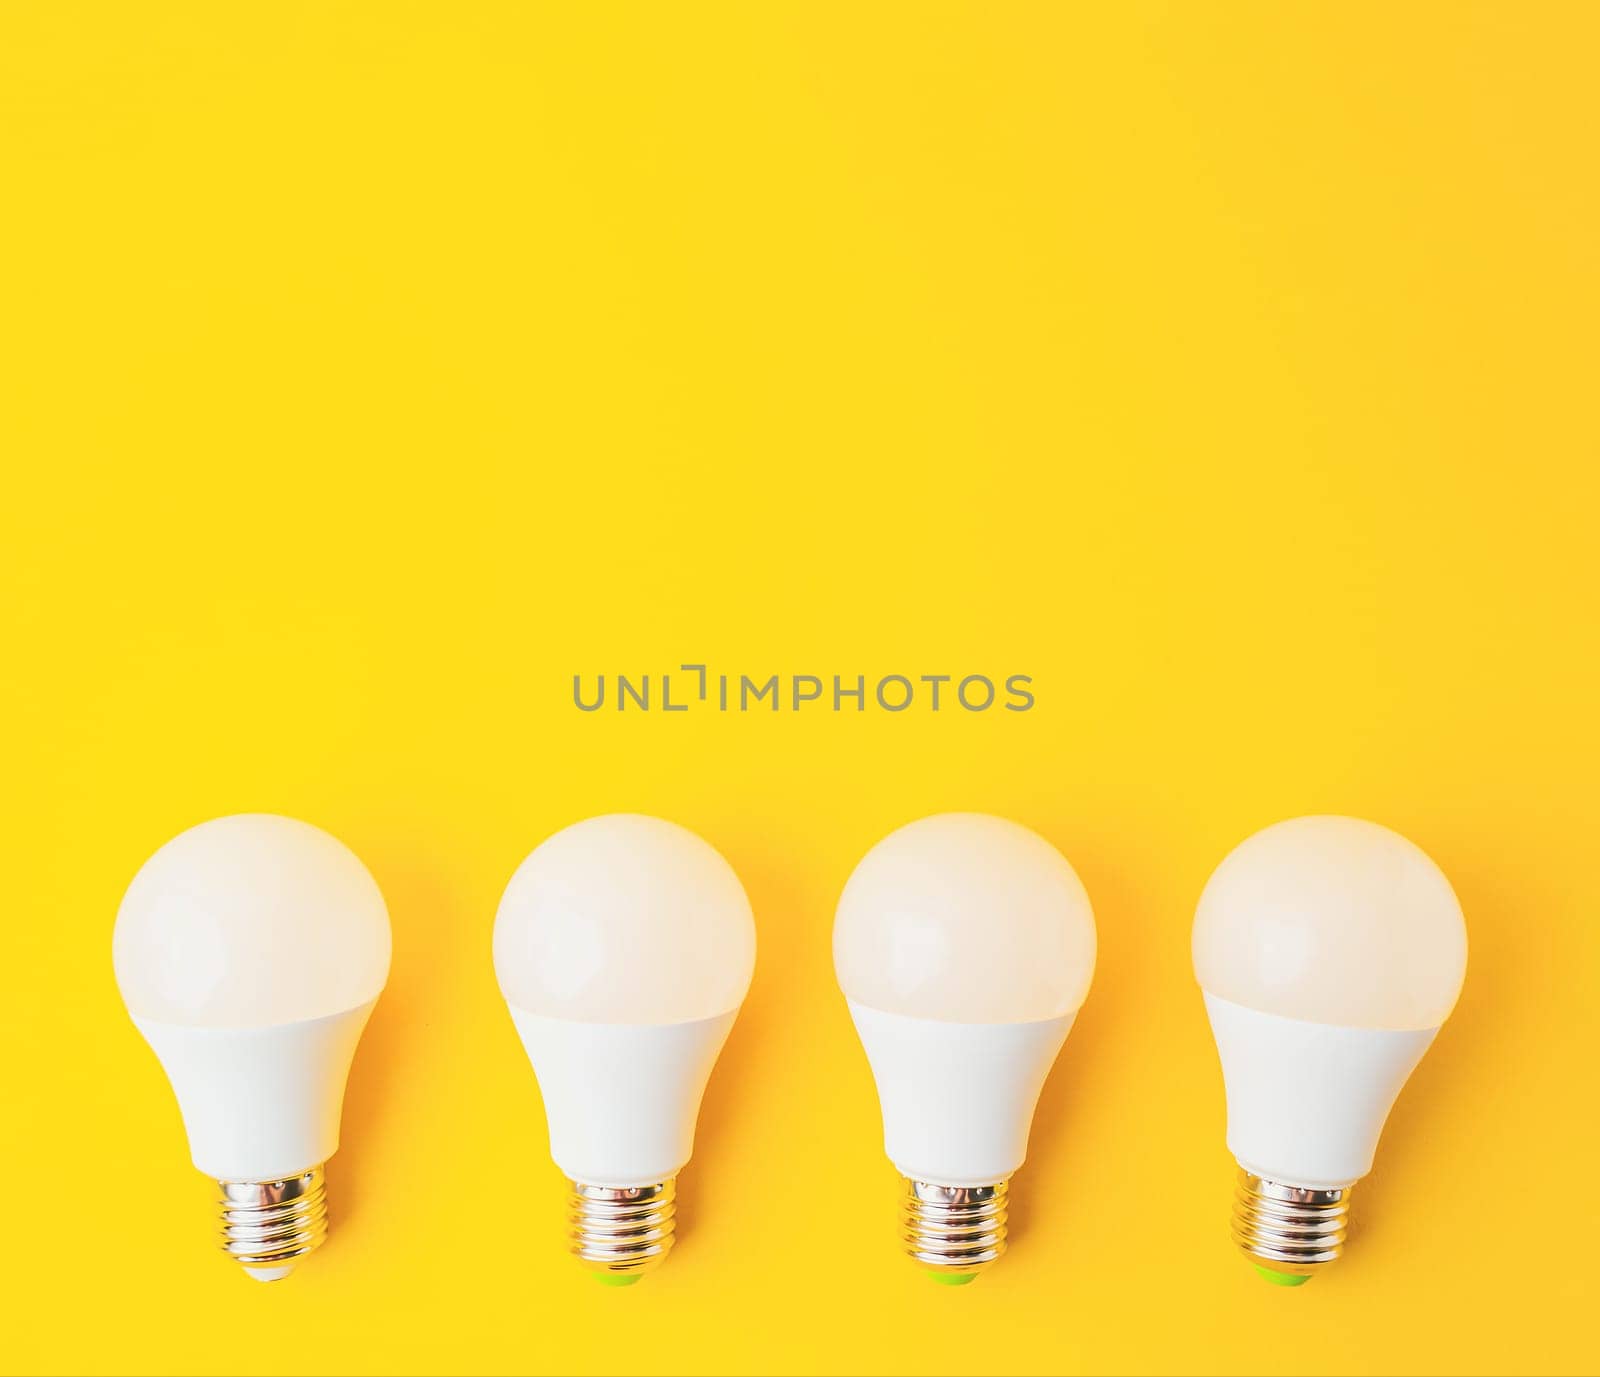 Four white light bulbs are arranged on a yellow background. The bulbs are all the same size and shape, and they are evenly spaced out. Concept of uniformity and order, as the bulbs are all identical